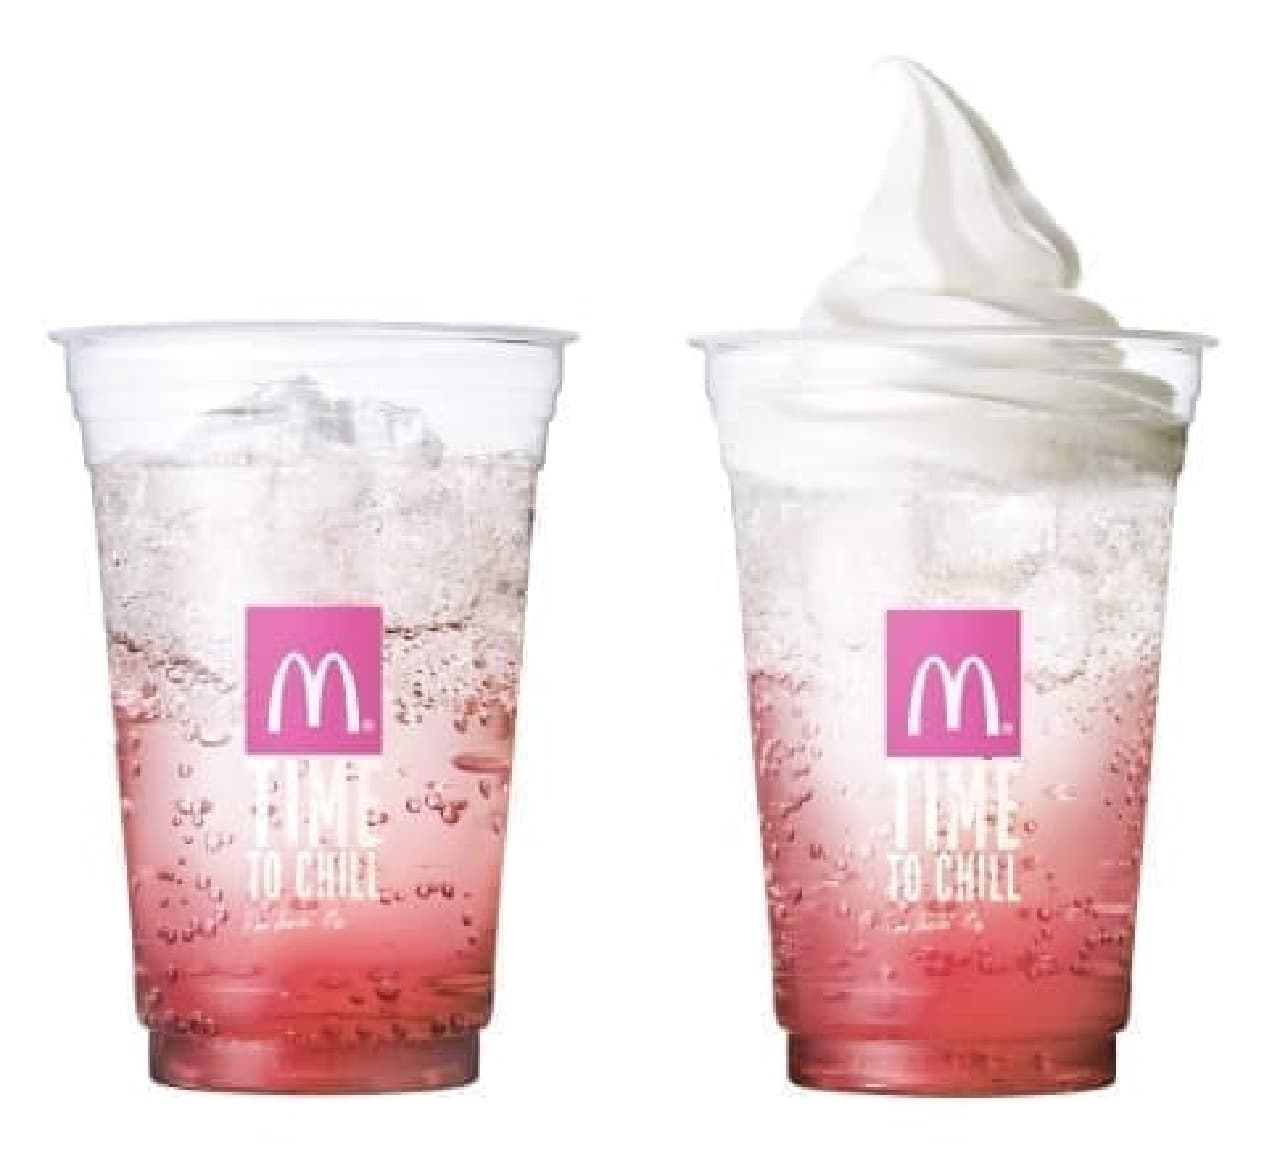 How about a cherry-colored drink together? (The photo on the left is McFizz Sakura Cherry)